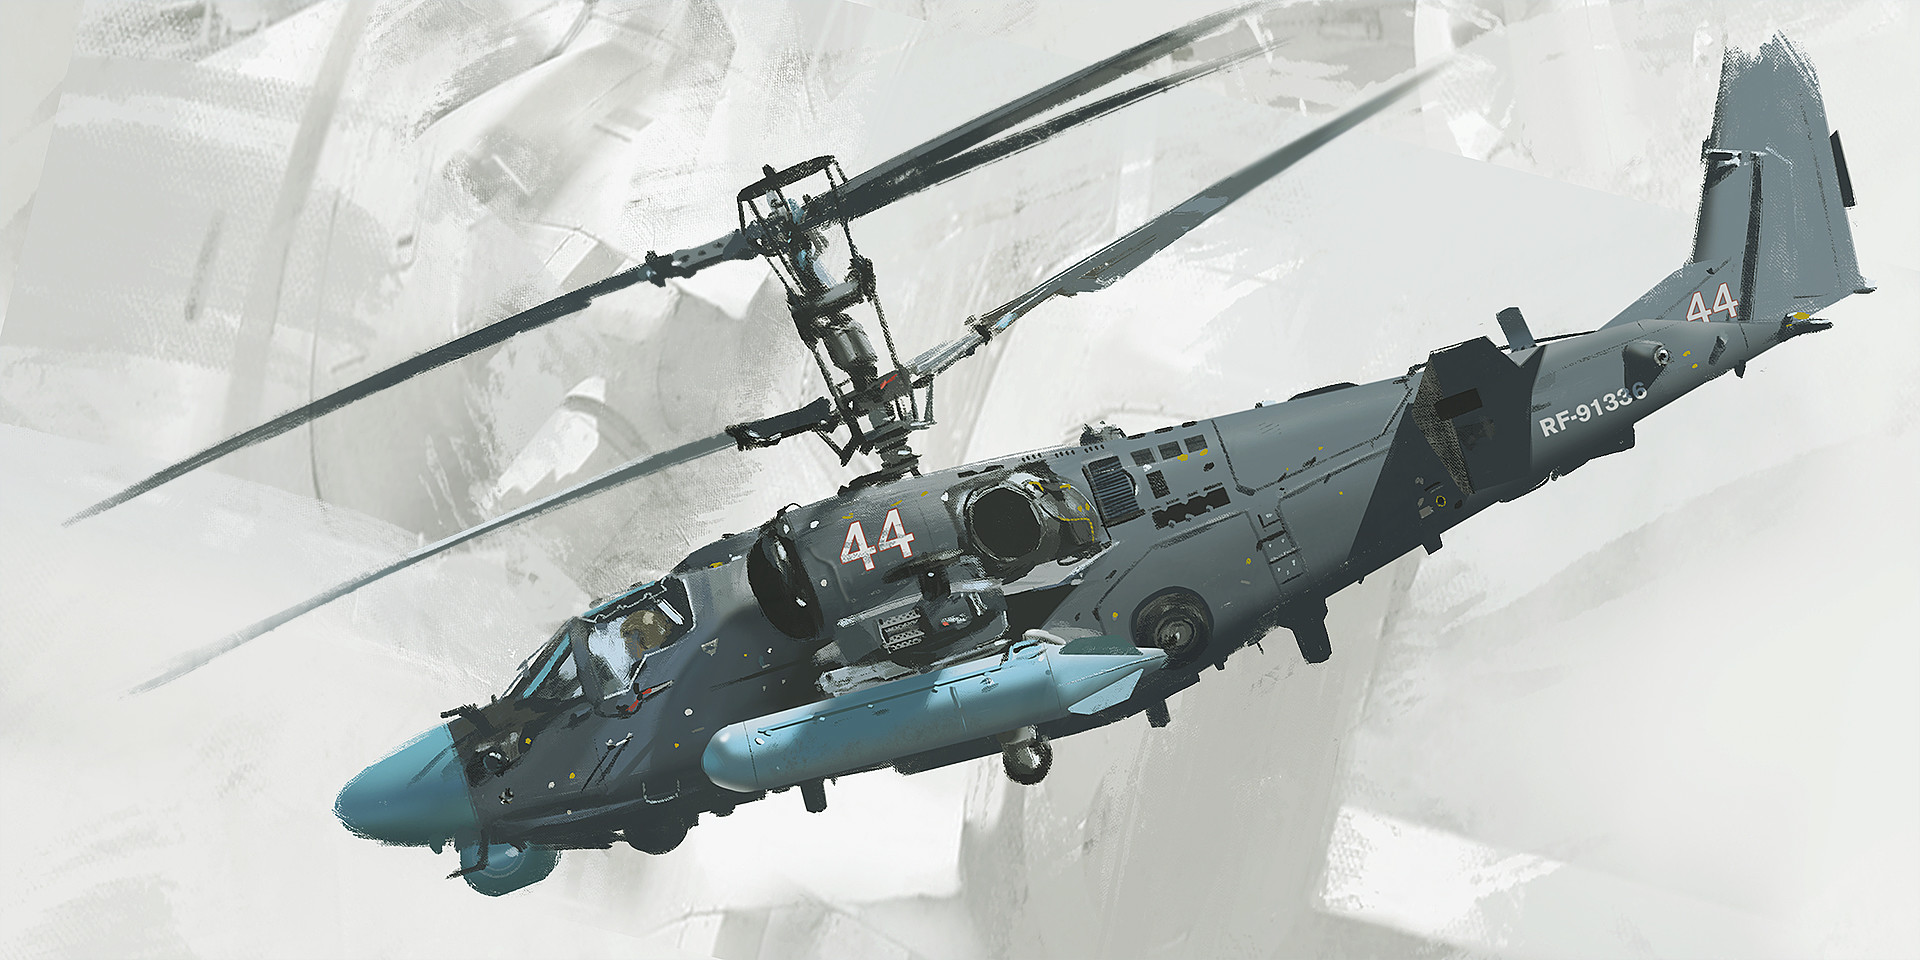 Vehicle Fly White Background Helicopter Concept Art Joe Gloria Aircraft Military Aircraft Military A 1920x960